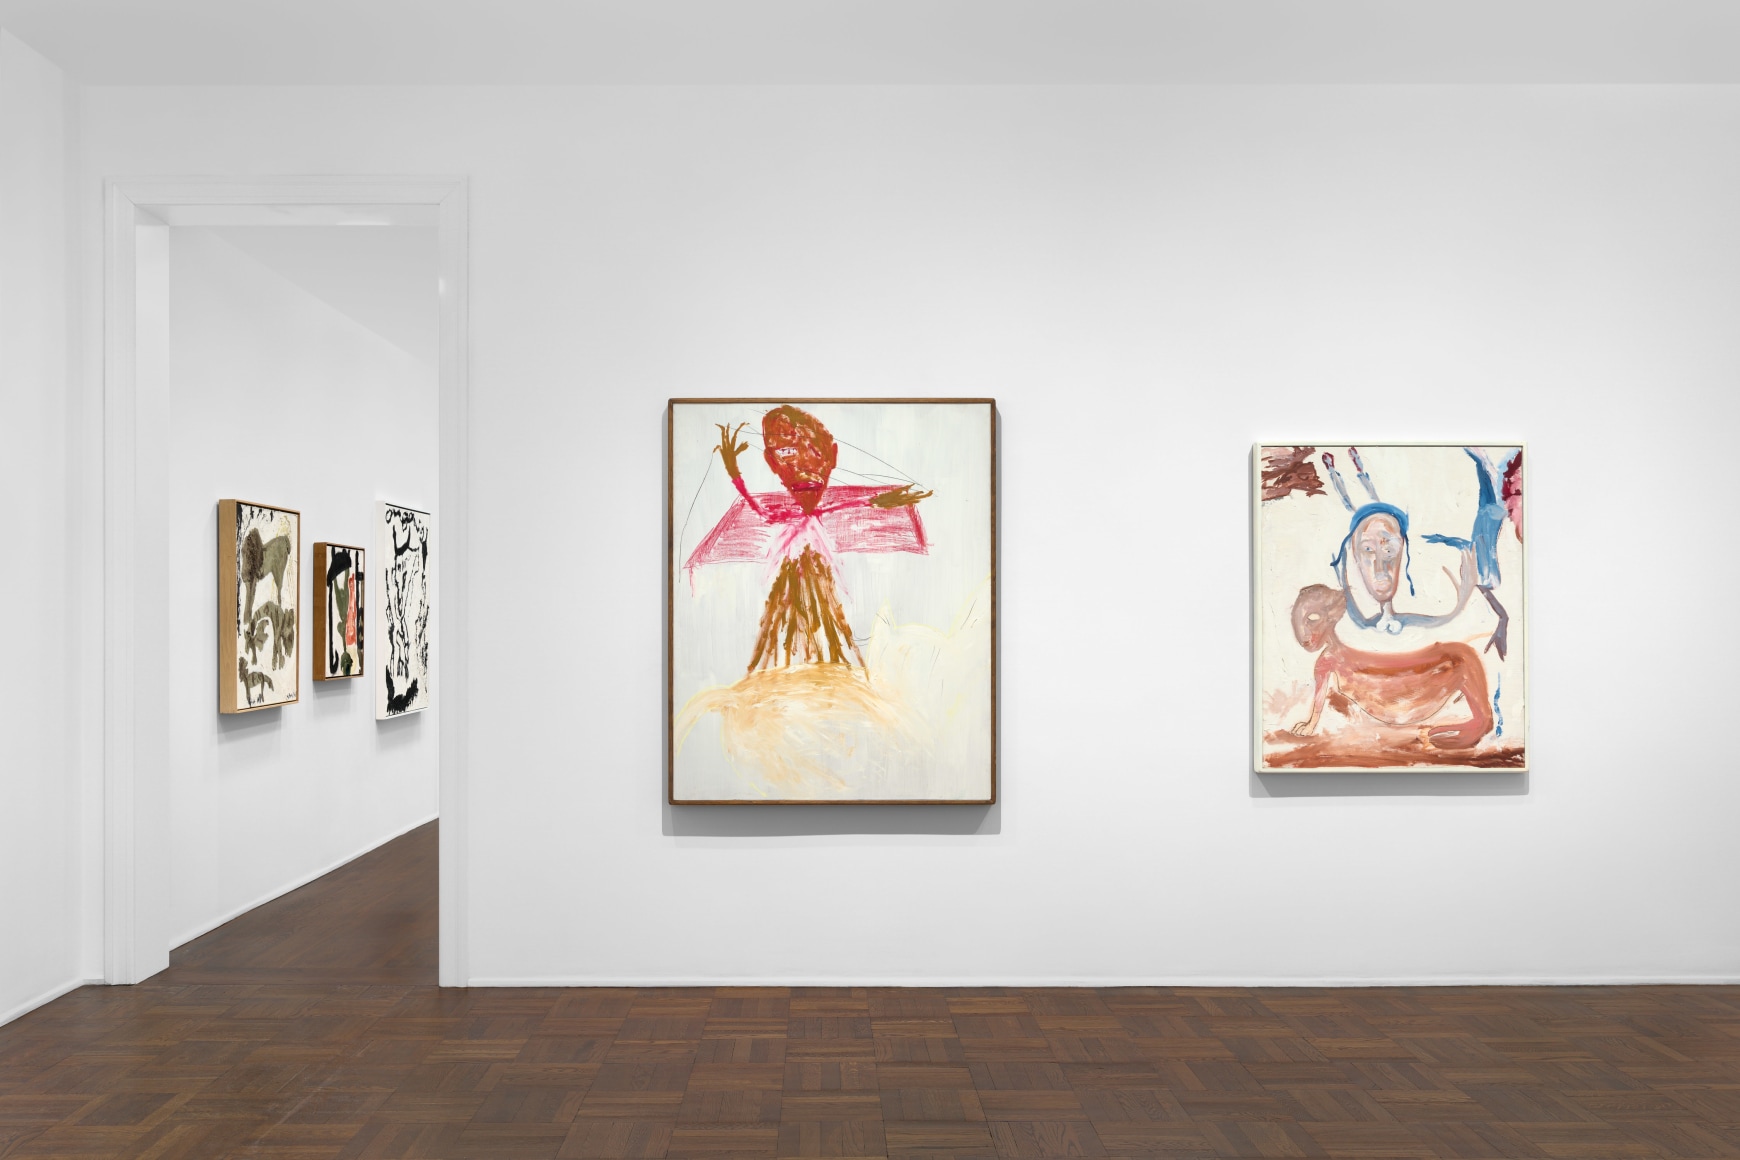 Don Van Vliet, Parapliers the Willow Dipped, Paintings 1967-1997, New York, 2020, Installation Image 1